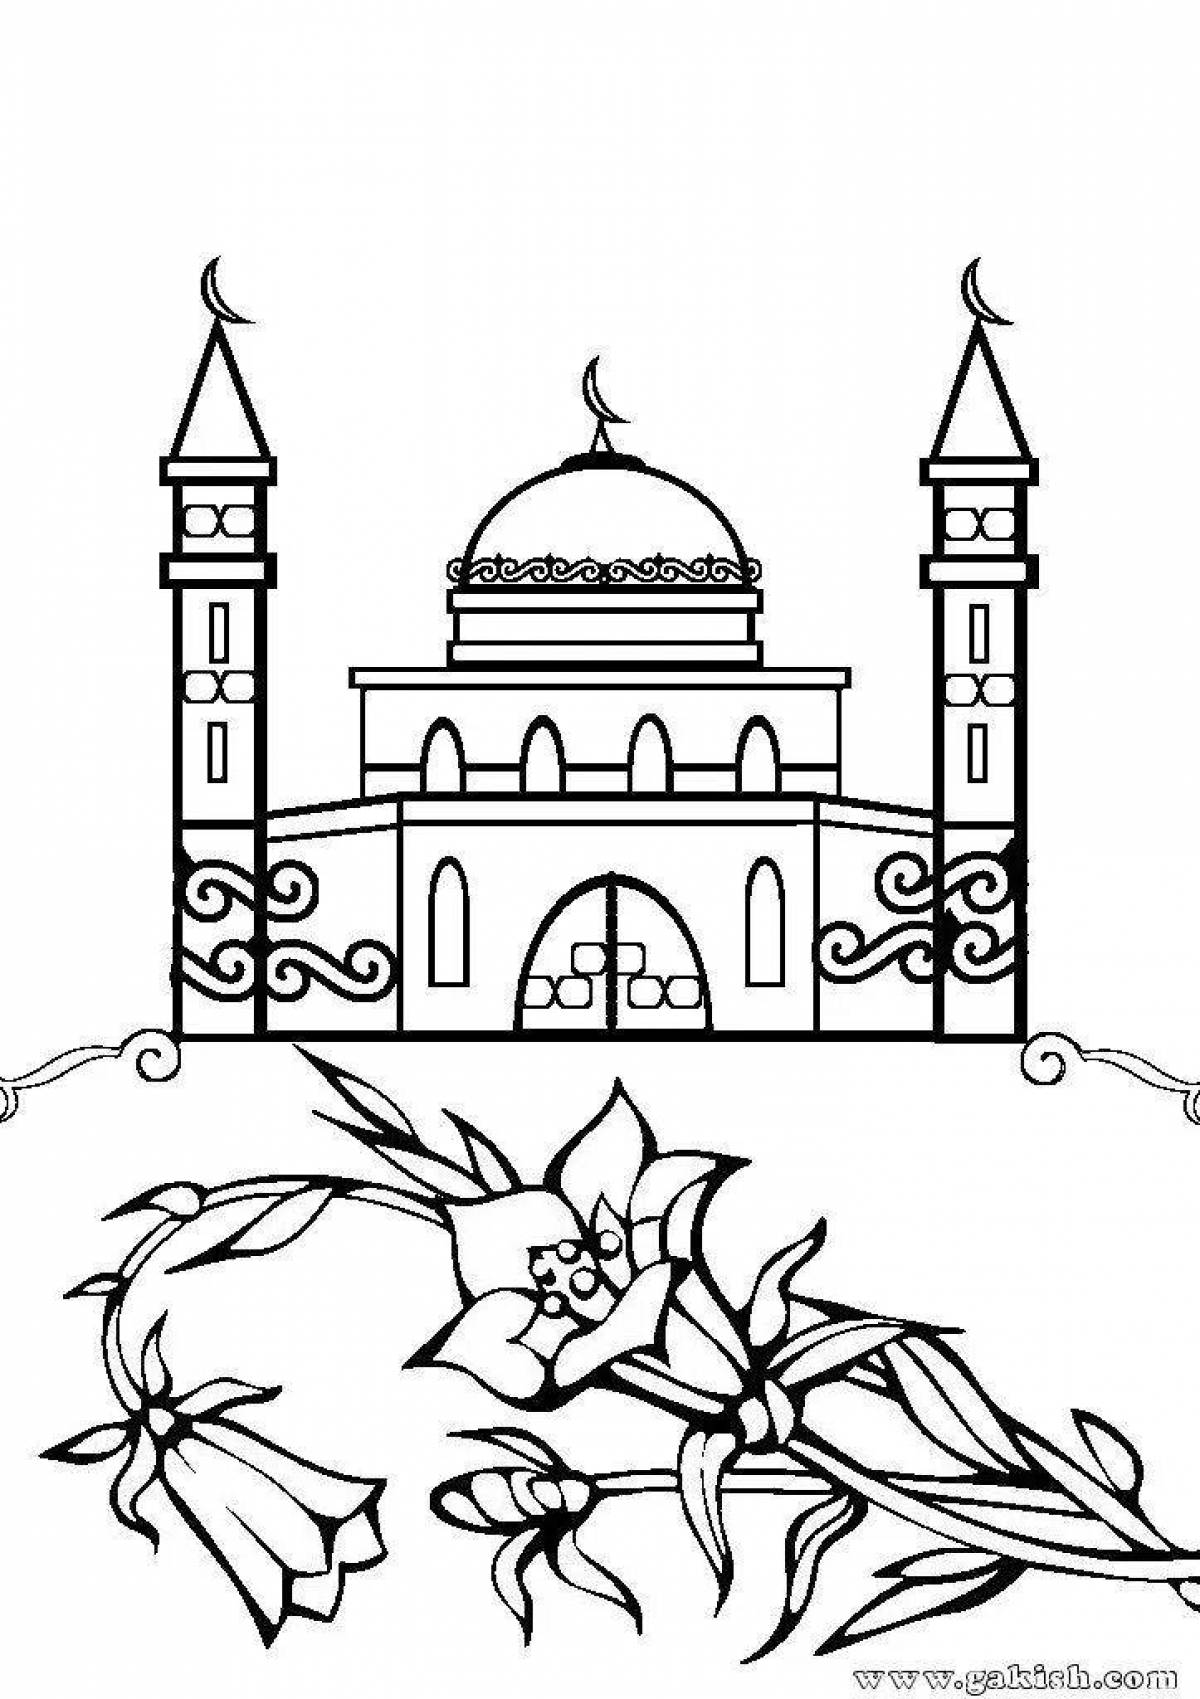 Adorable mosque coloring book for kids